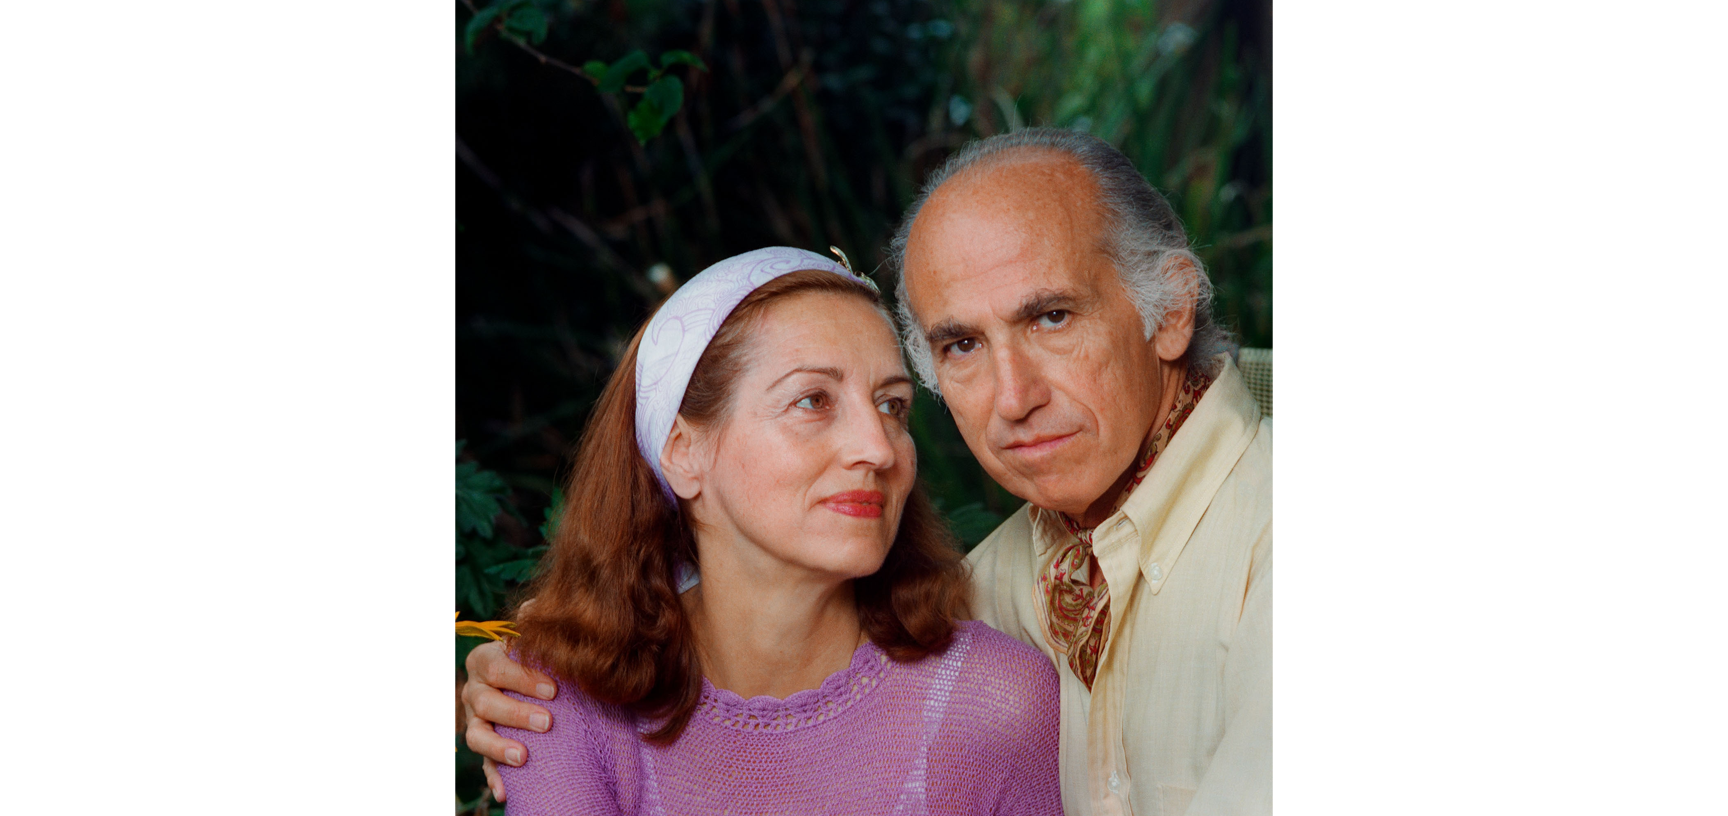 Portrait of Jonas Salk and Françoise Gilot - an older white male balding with white hair, dressed in a cream shirt and jumper with a patterned neckscarf, hs arm is round a young red haired woman in a pink jumper and white headband.